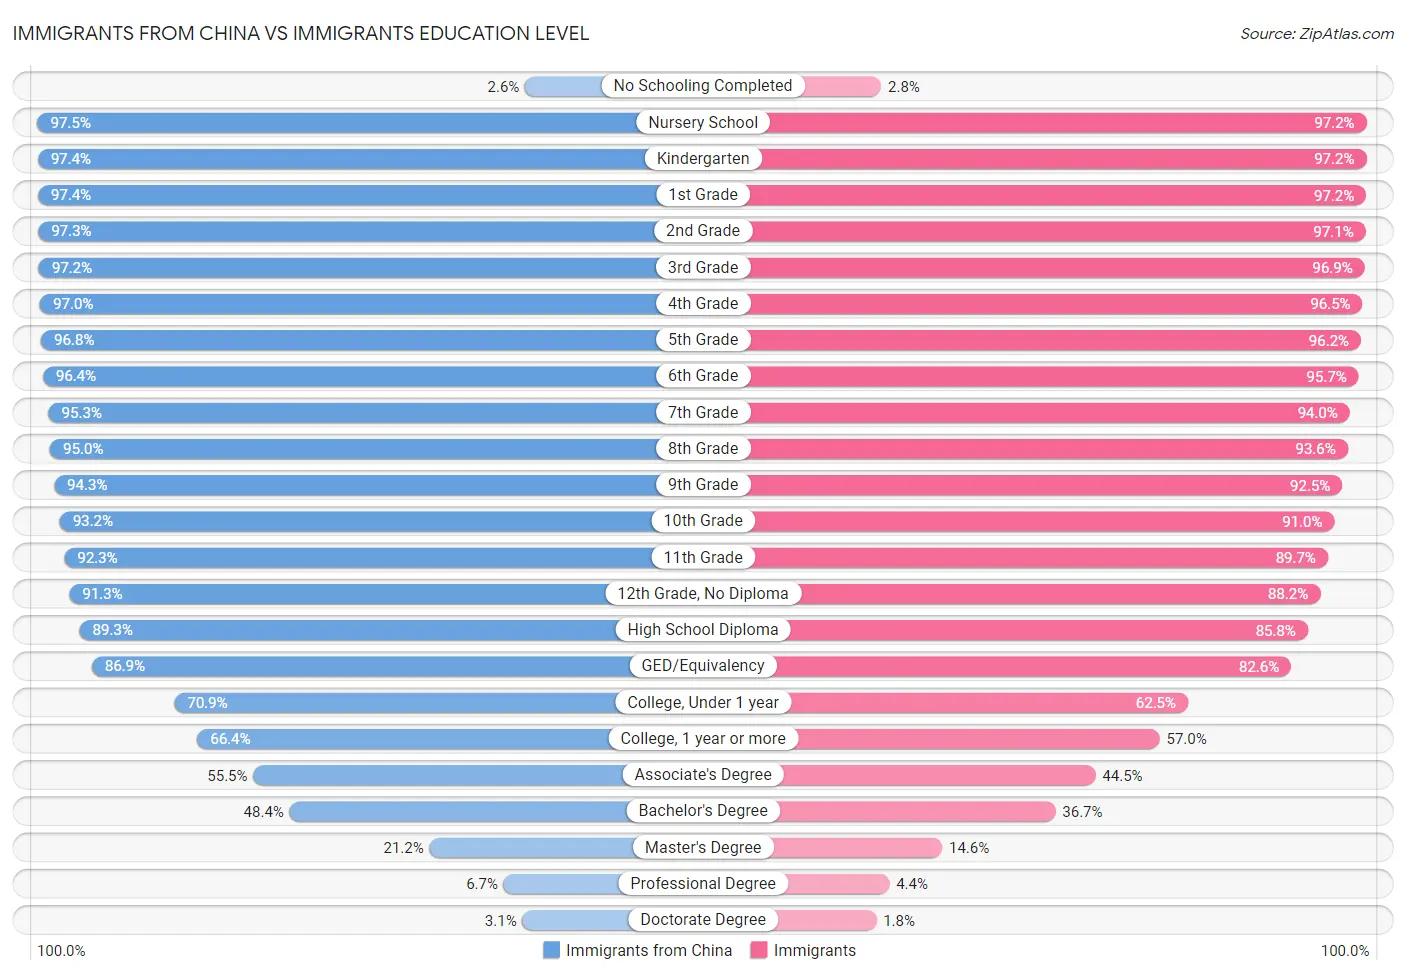 Immigrants from China vs Immigrants Education Level